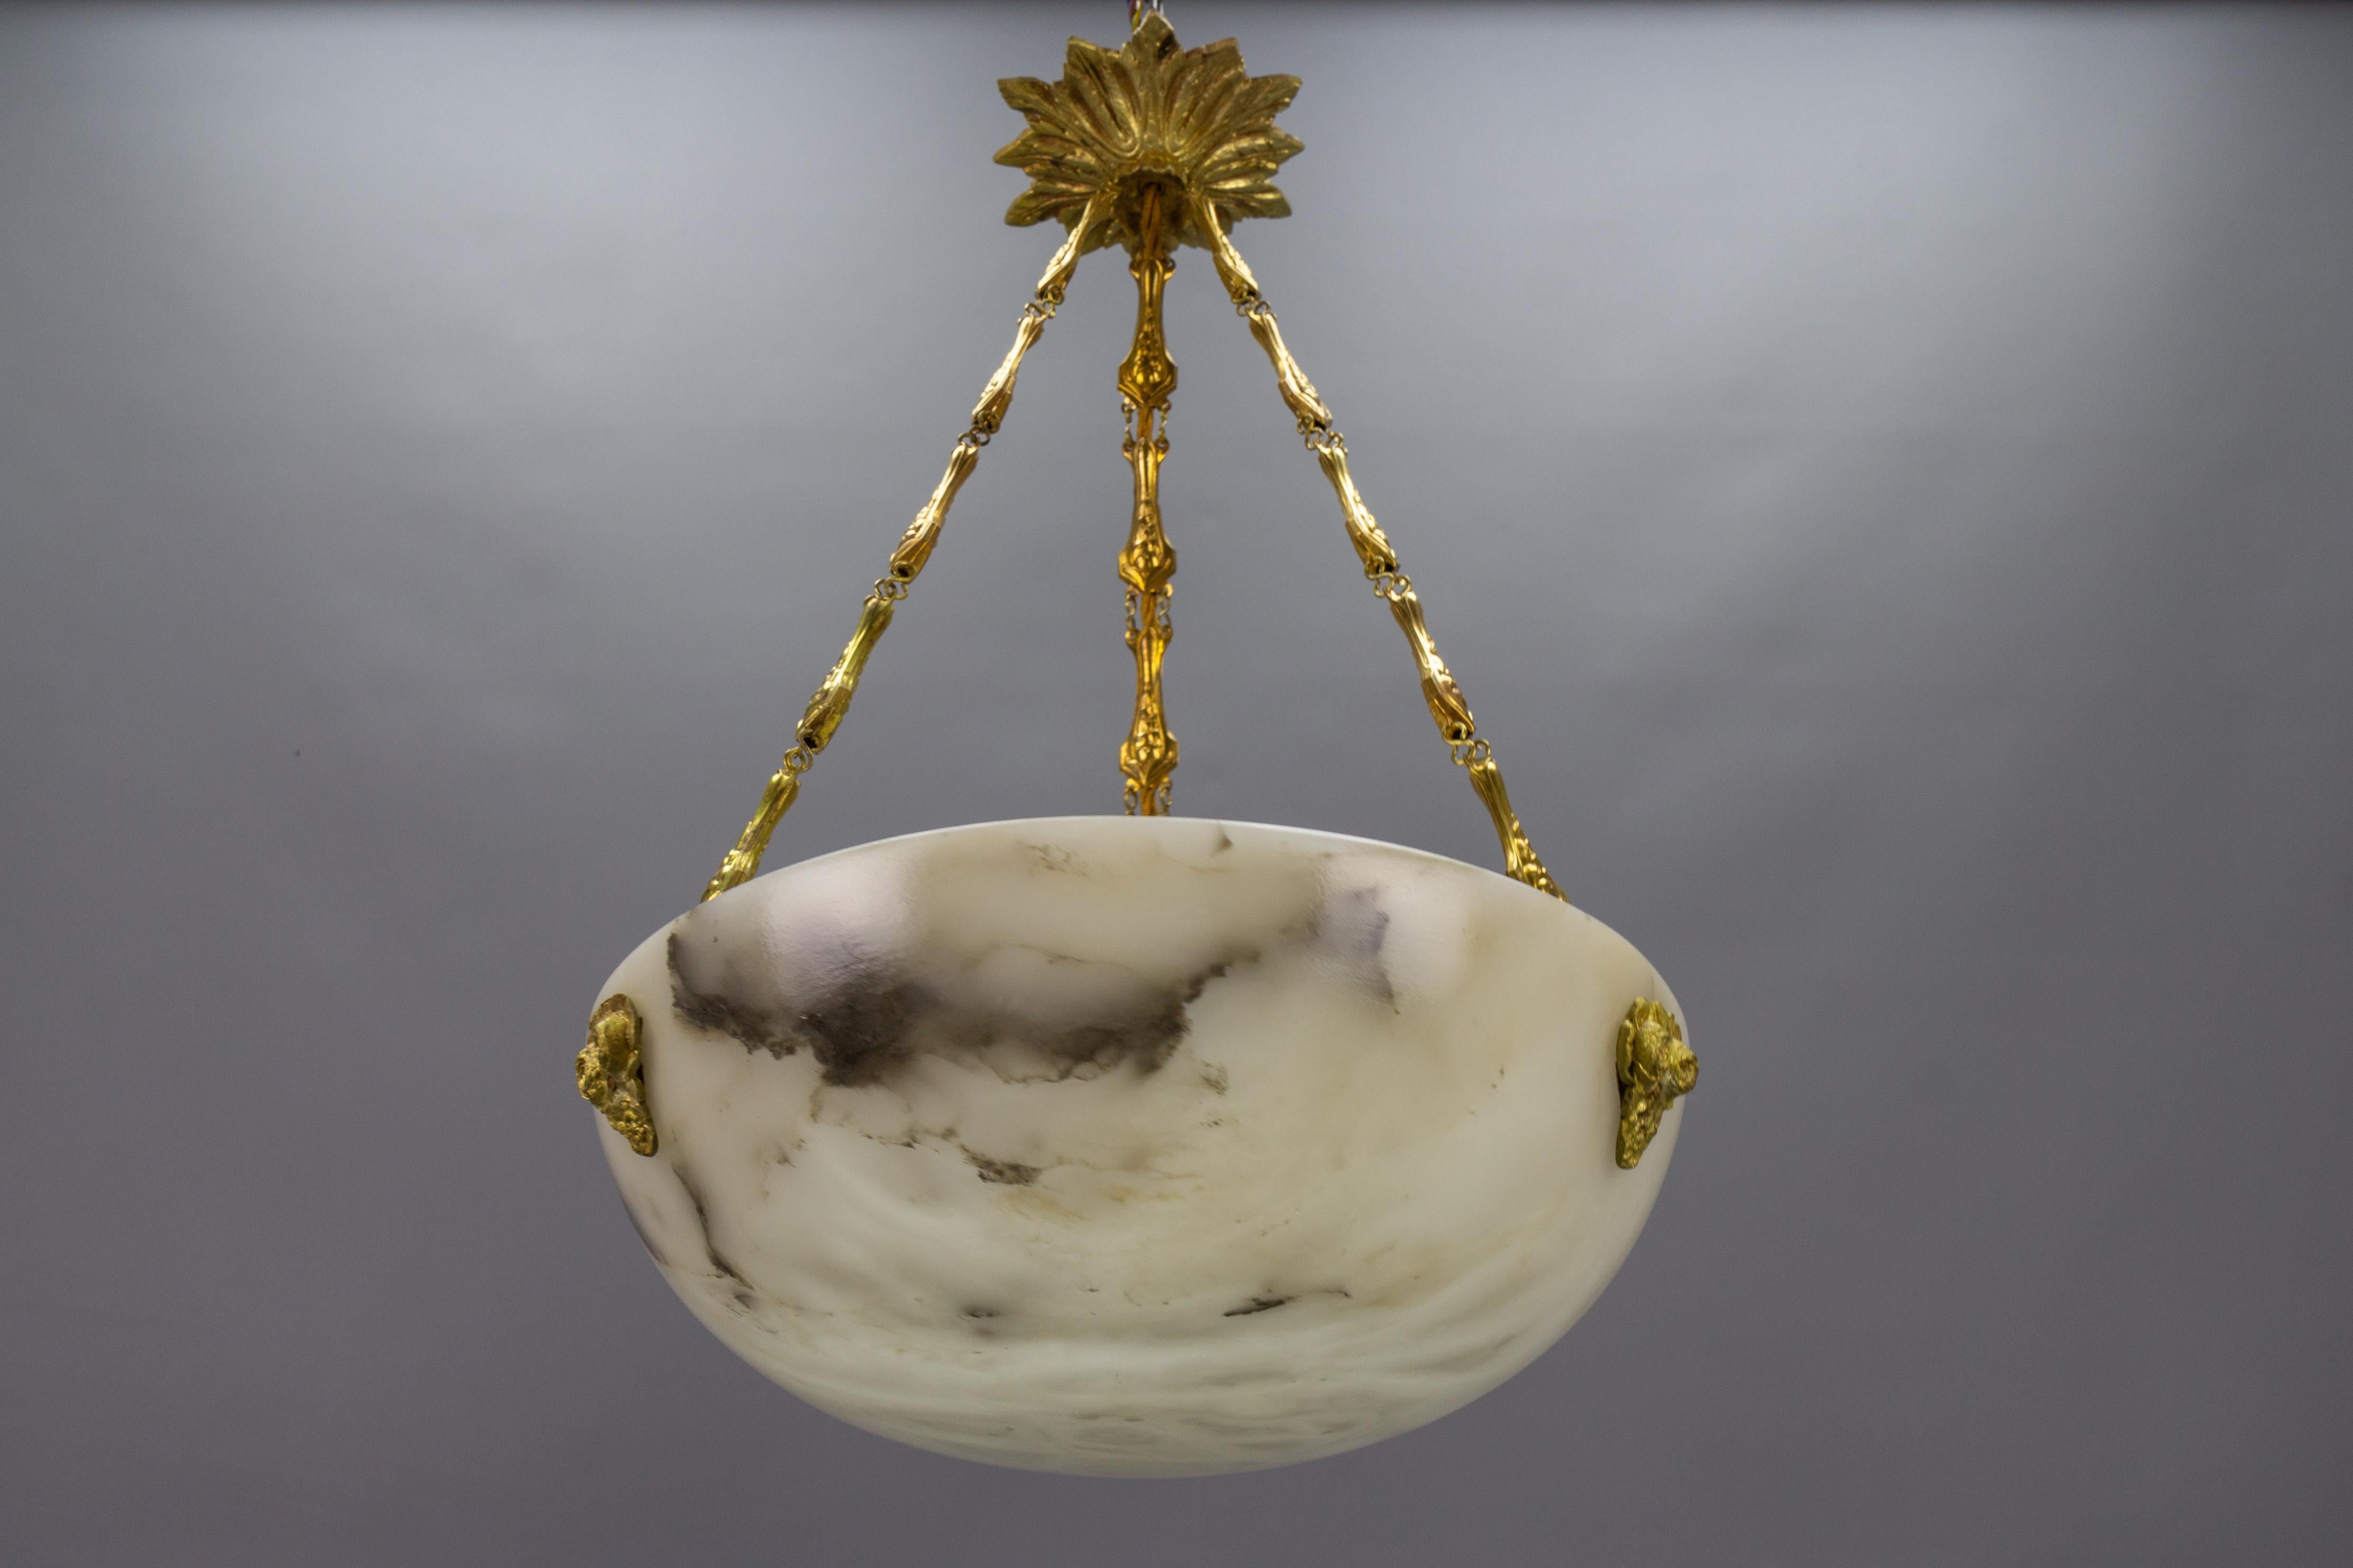 An Art Nouveau period white and black veined alabaster pendant light with bronze and brass fixtures.
An adorable and good-sized alabaster pendant ceiling light fixture from circa the 1920s. Beautifully veined white alabaster bowl suspended by three